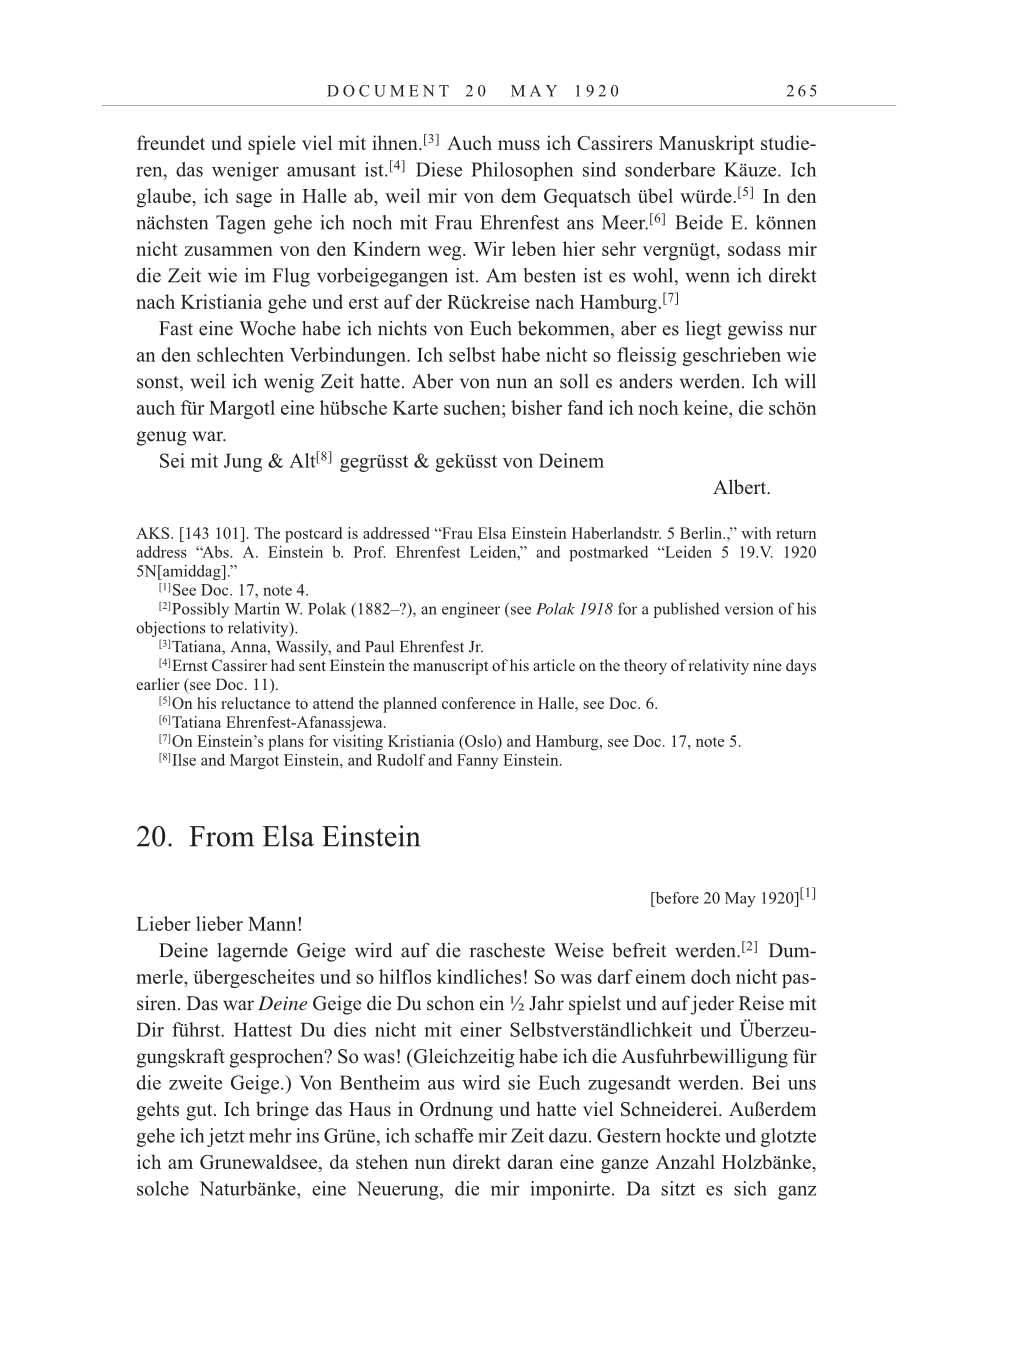 Volume 10: The Berlin Years: Correspondence May-December 1920 / Supplementary Correspondence 1909-1920 page 265